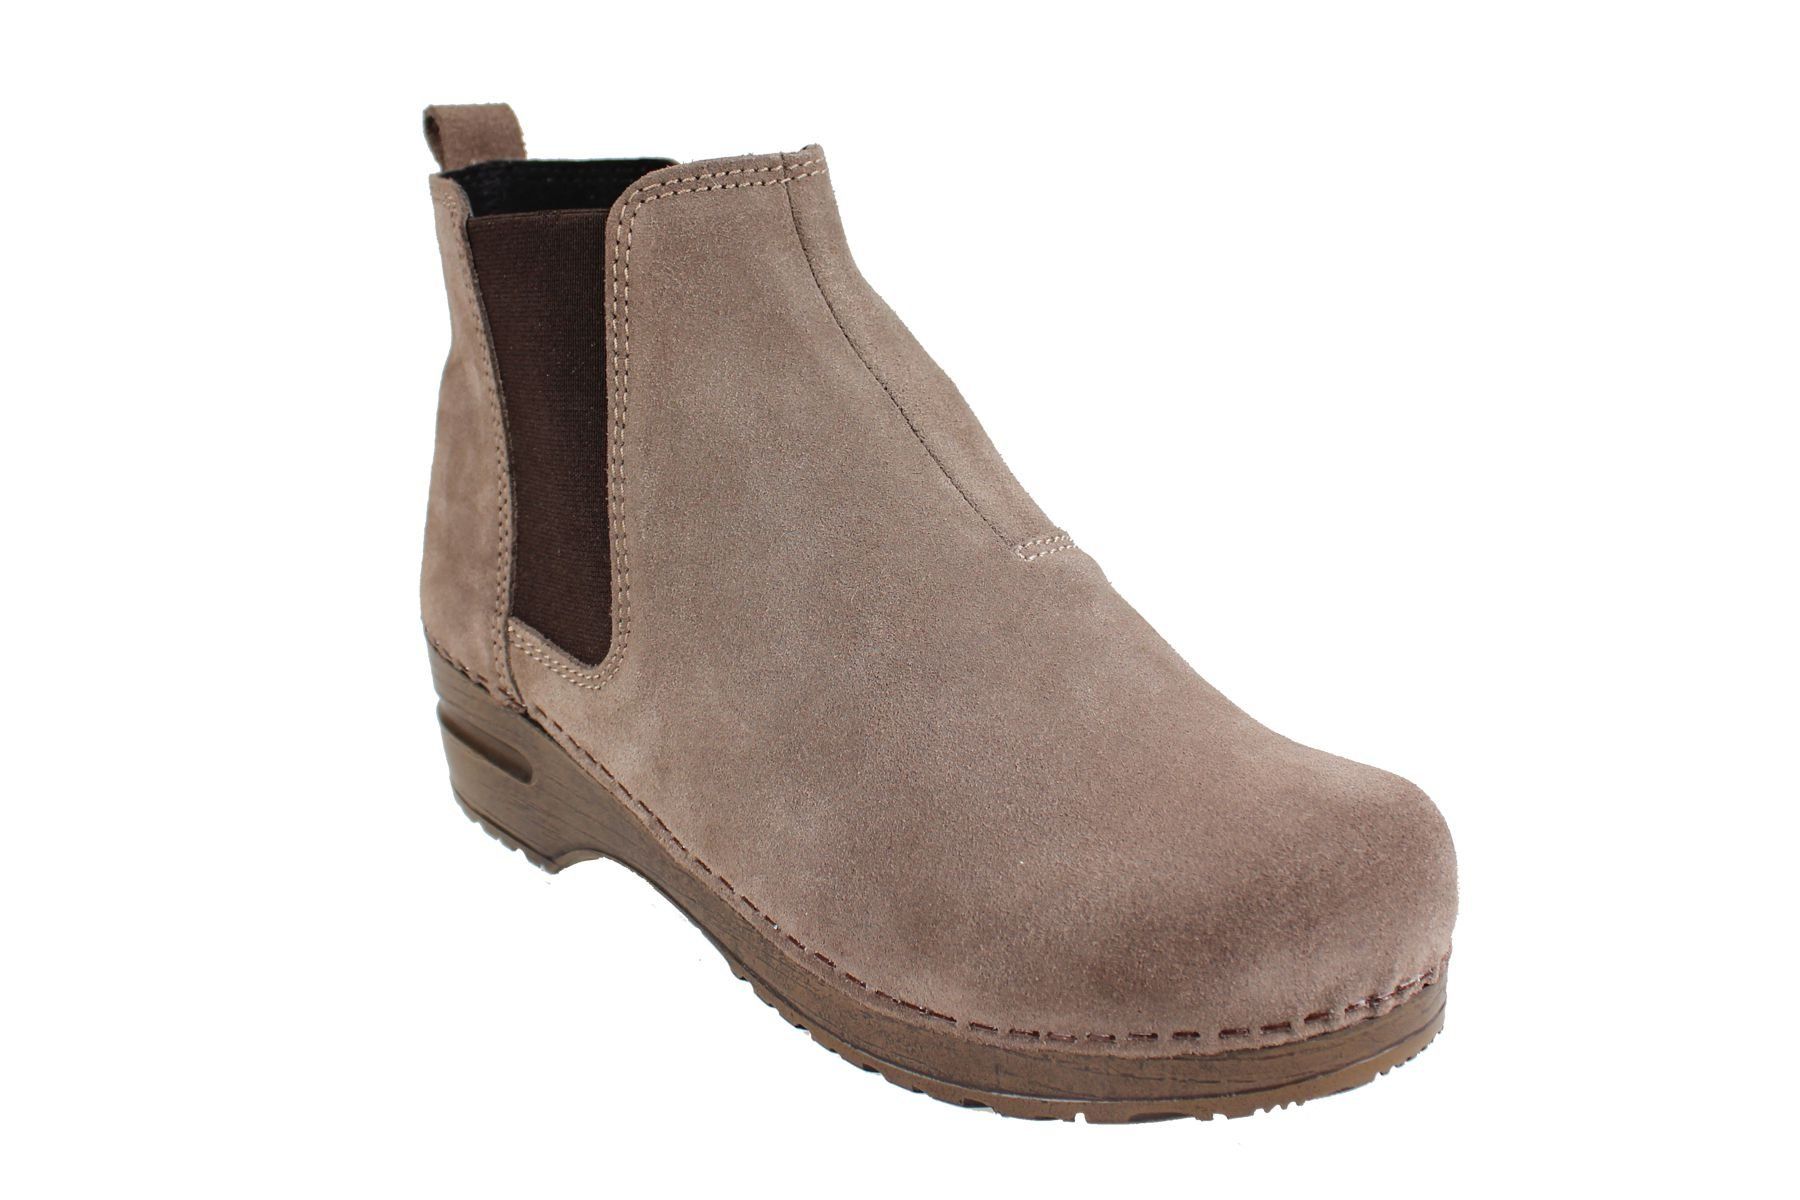 Sanita Vaika Soft Sole Boot in Suede Leather in Taupe